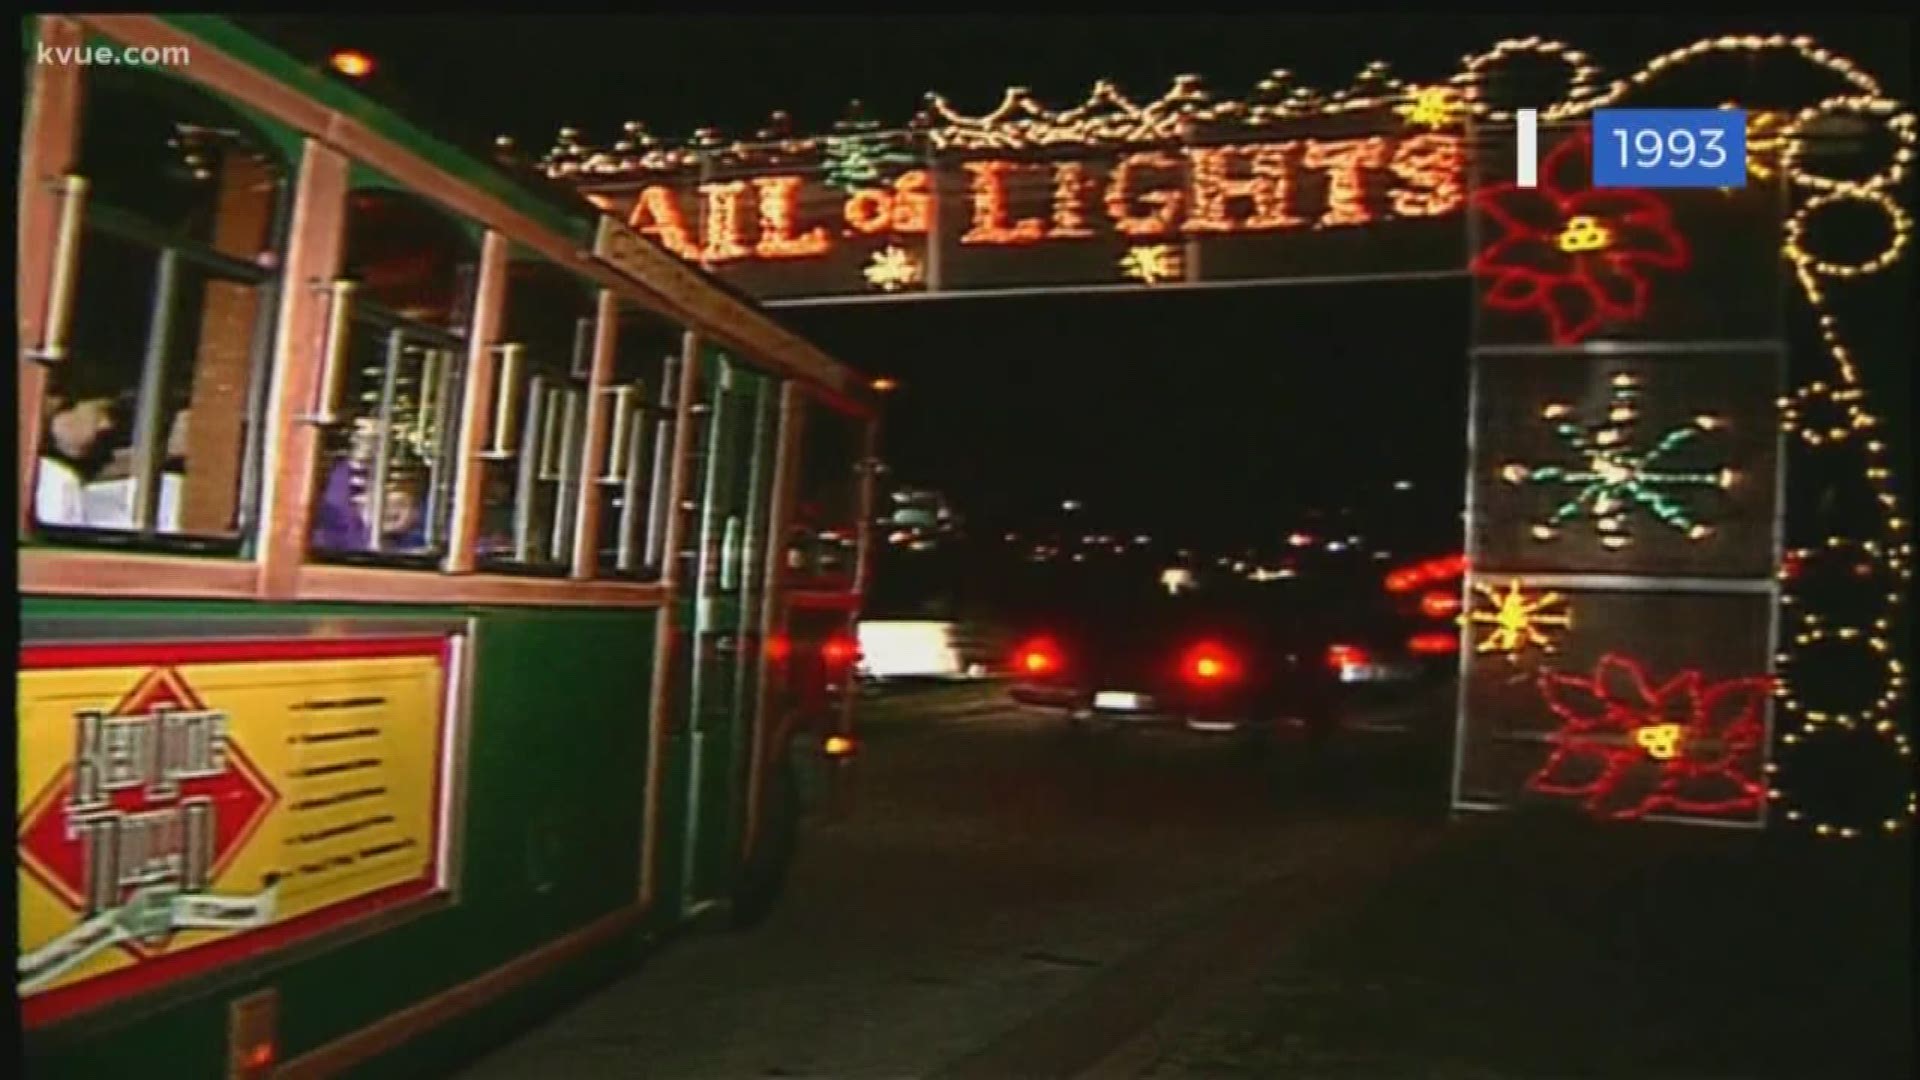 Bob Buckalew takes a look at the history of one of Austin's favorite holiday traditions.